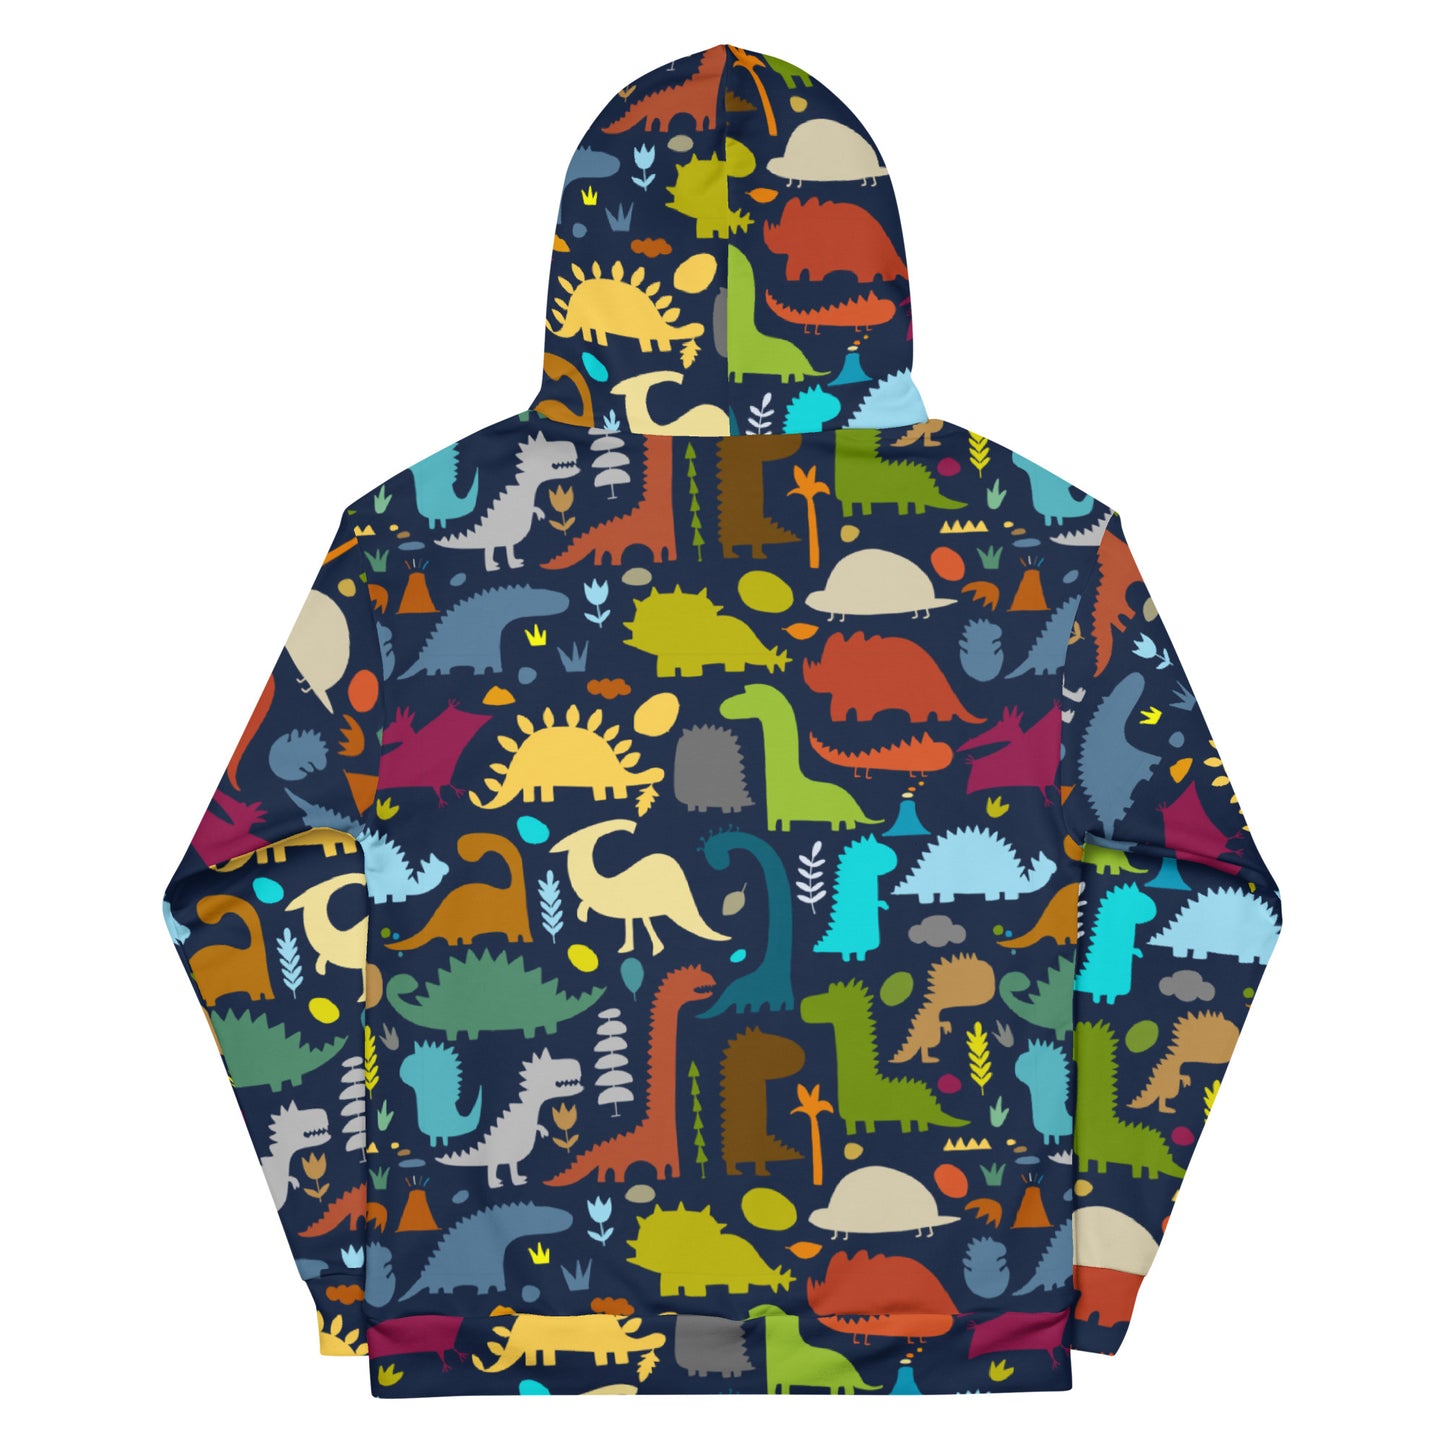 Unisex all over print Hoodie with Dinosaurs